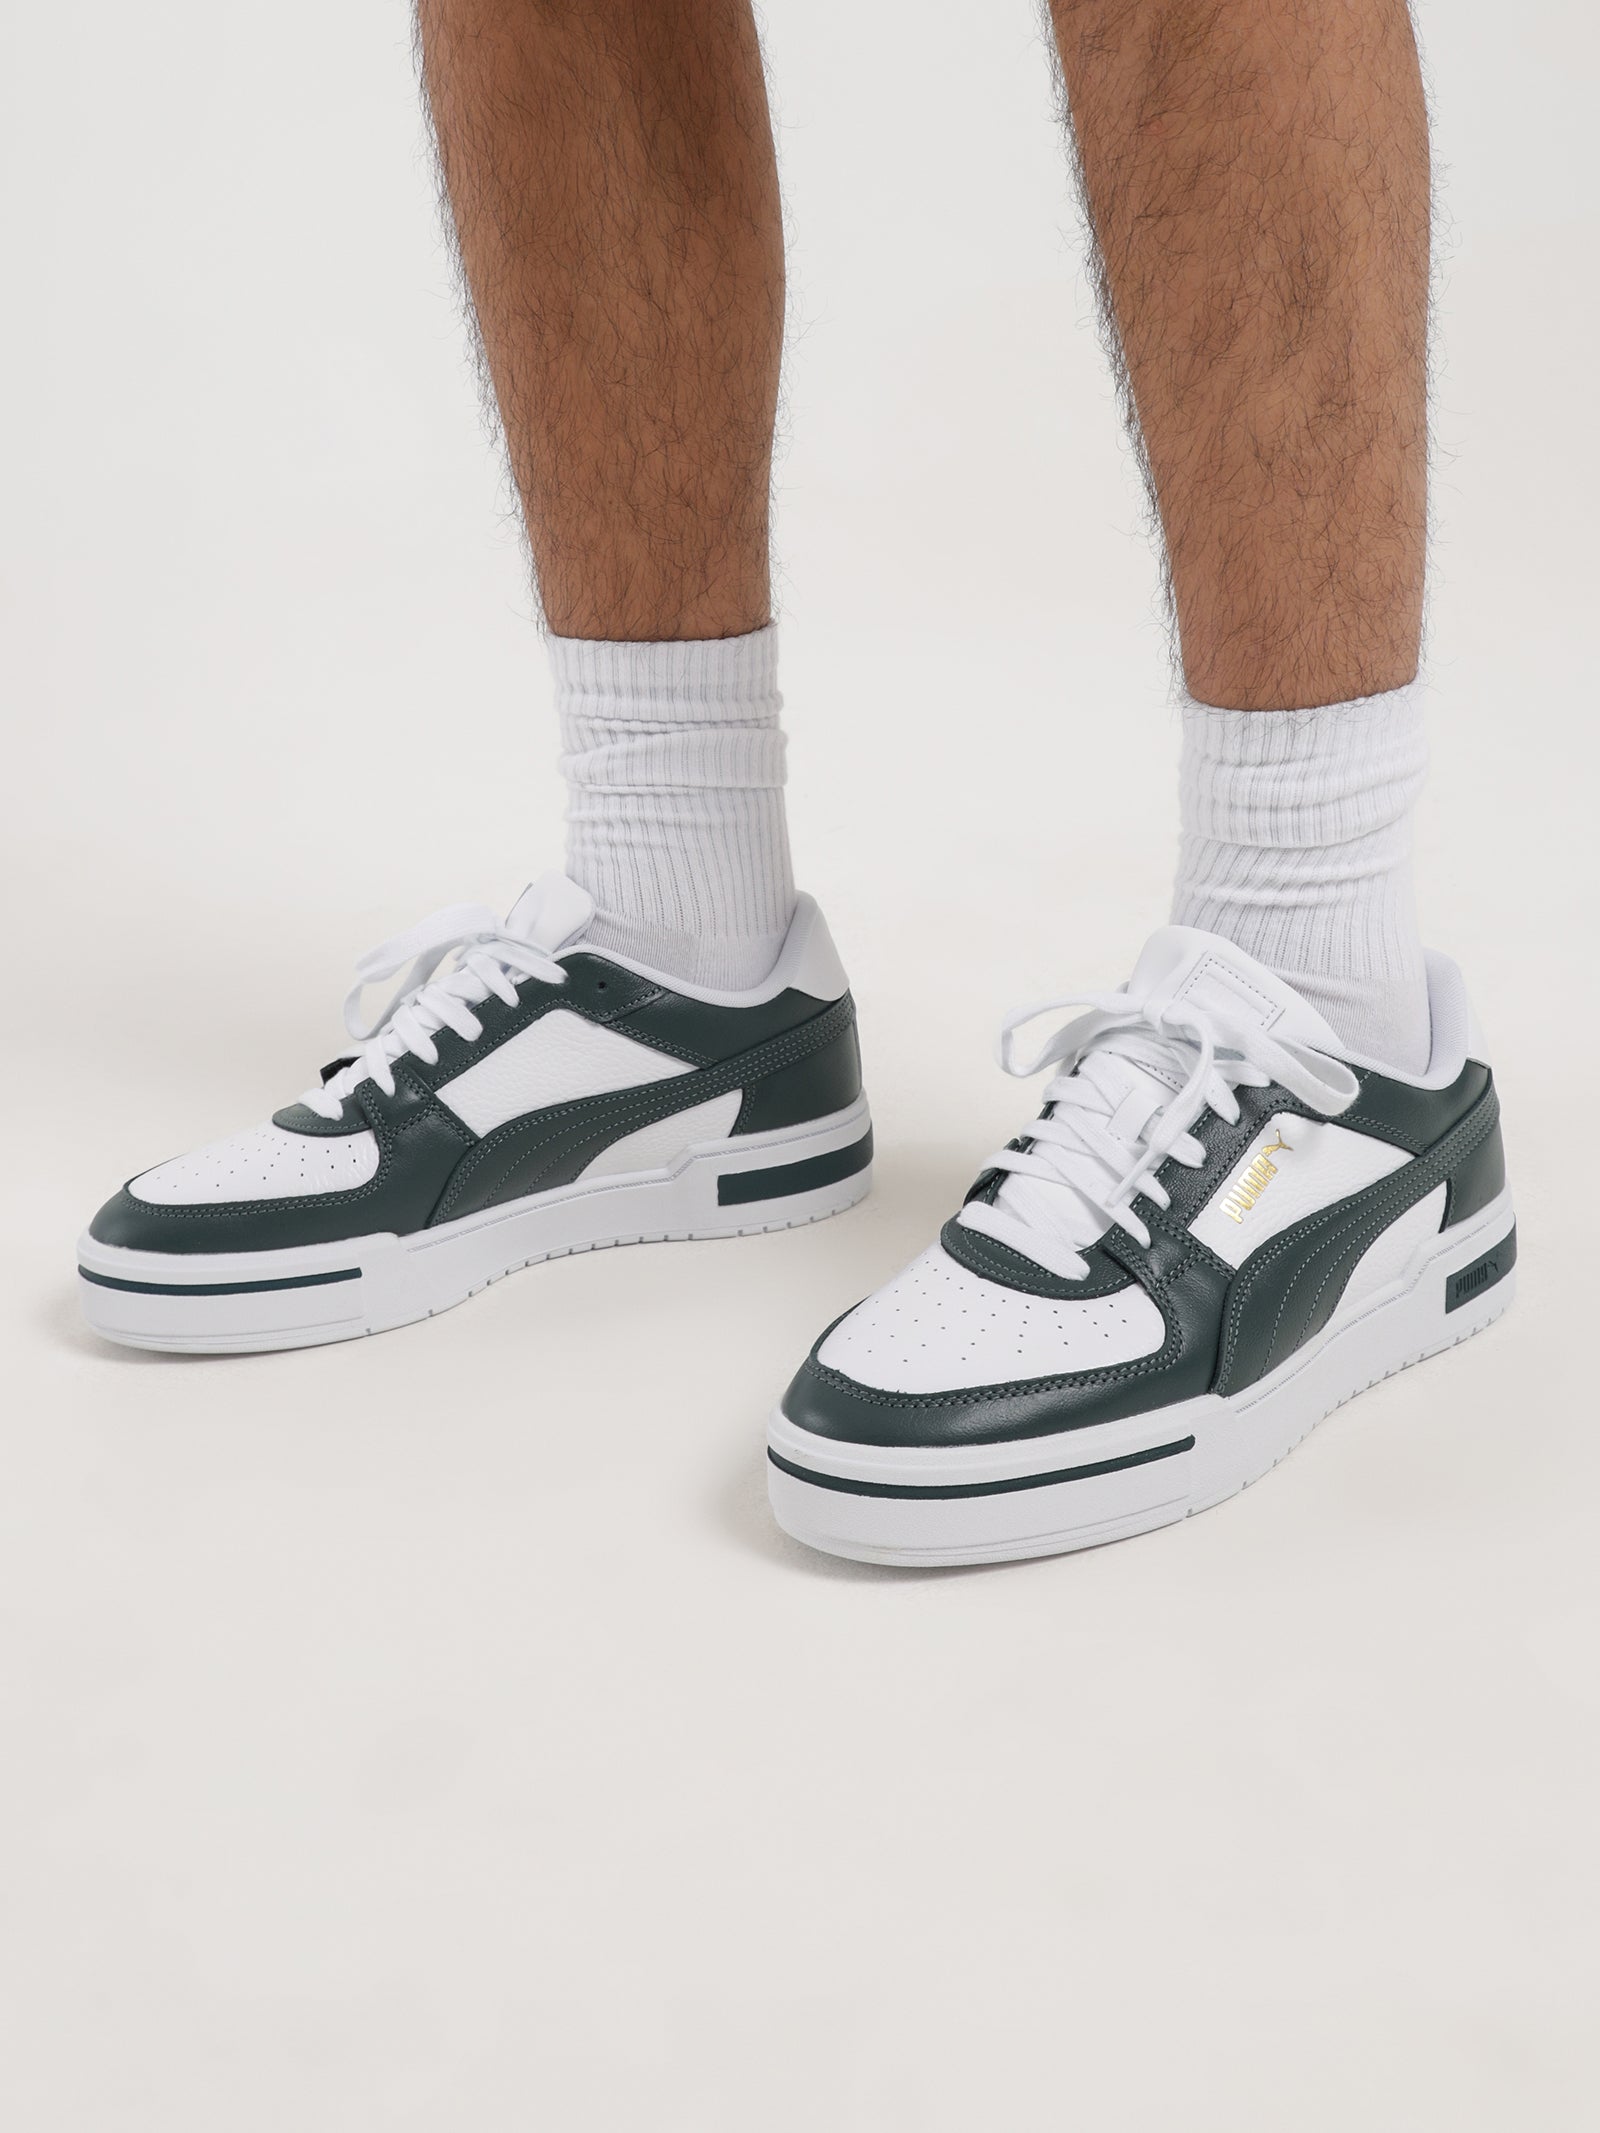 Puma Sneakers Online | Fast, Free* & Local Delivery - Glue Store